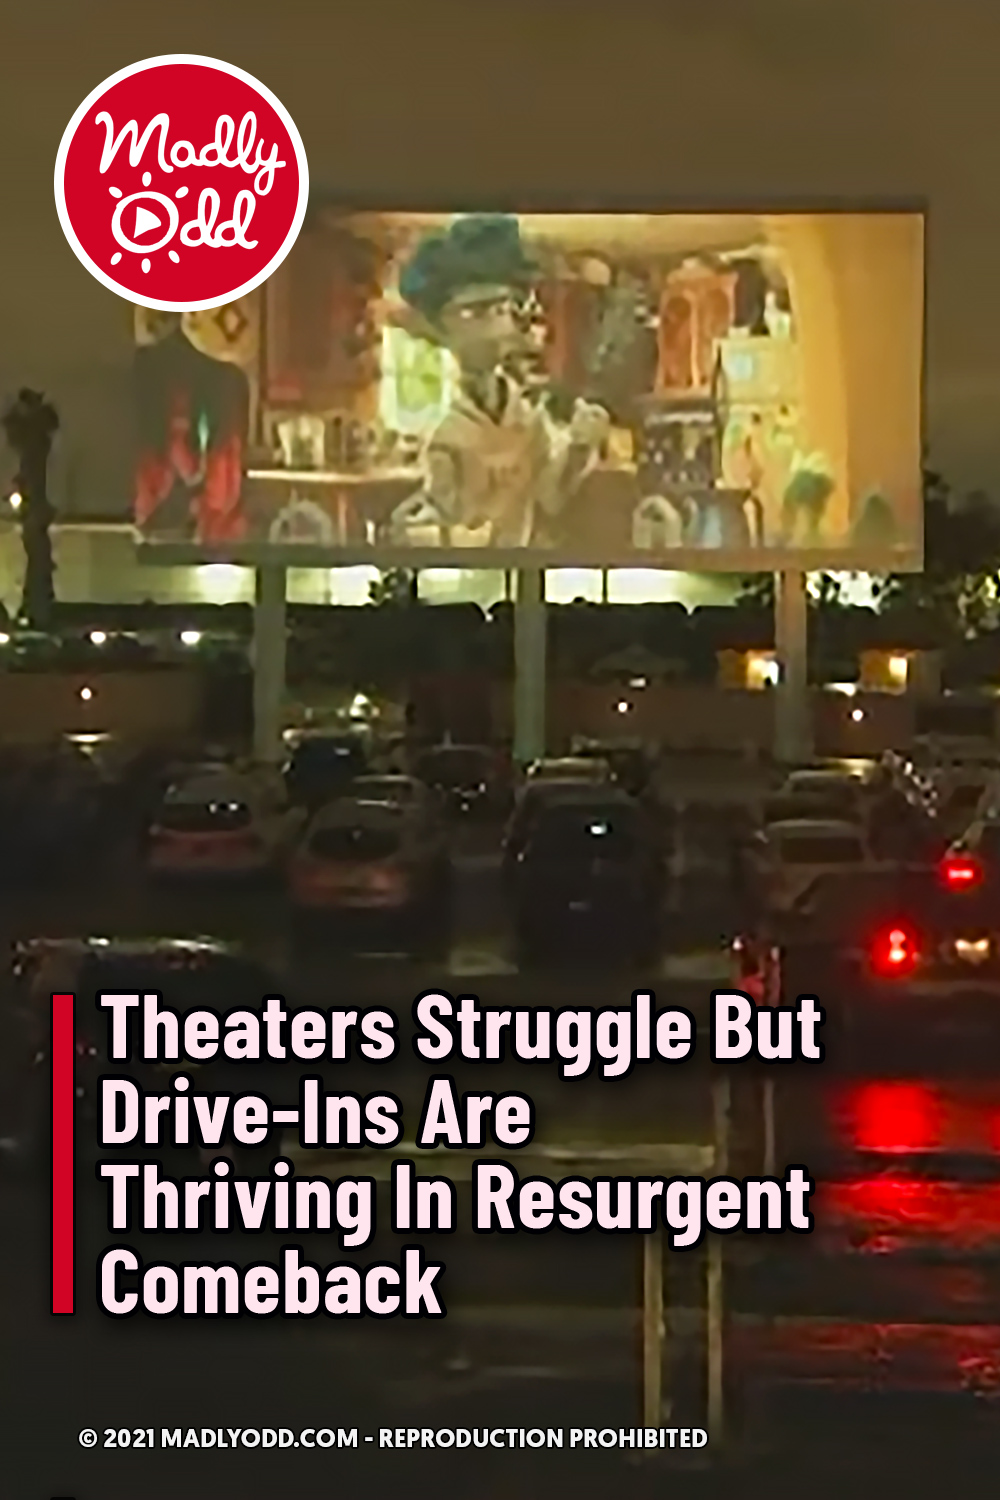 Theaters Struggle But Drive-Ins Are Thriving In Resurgent Comeback